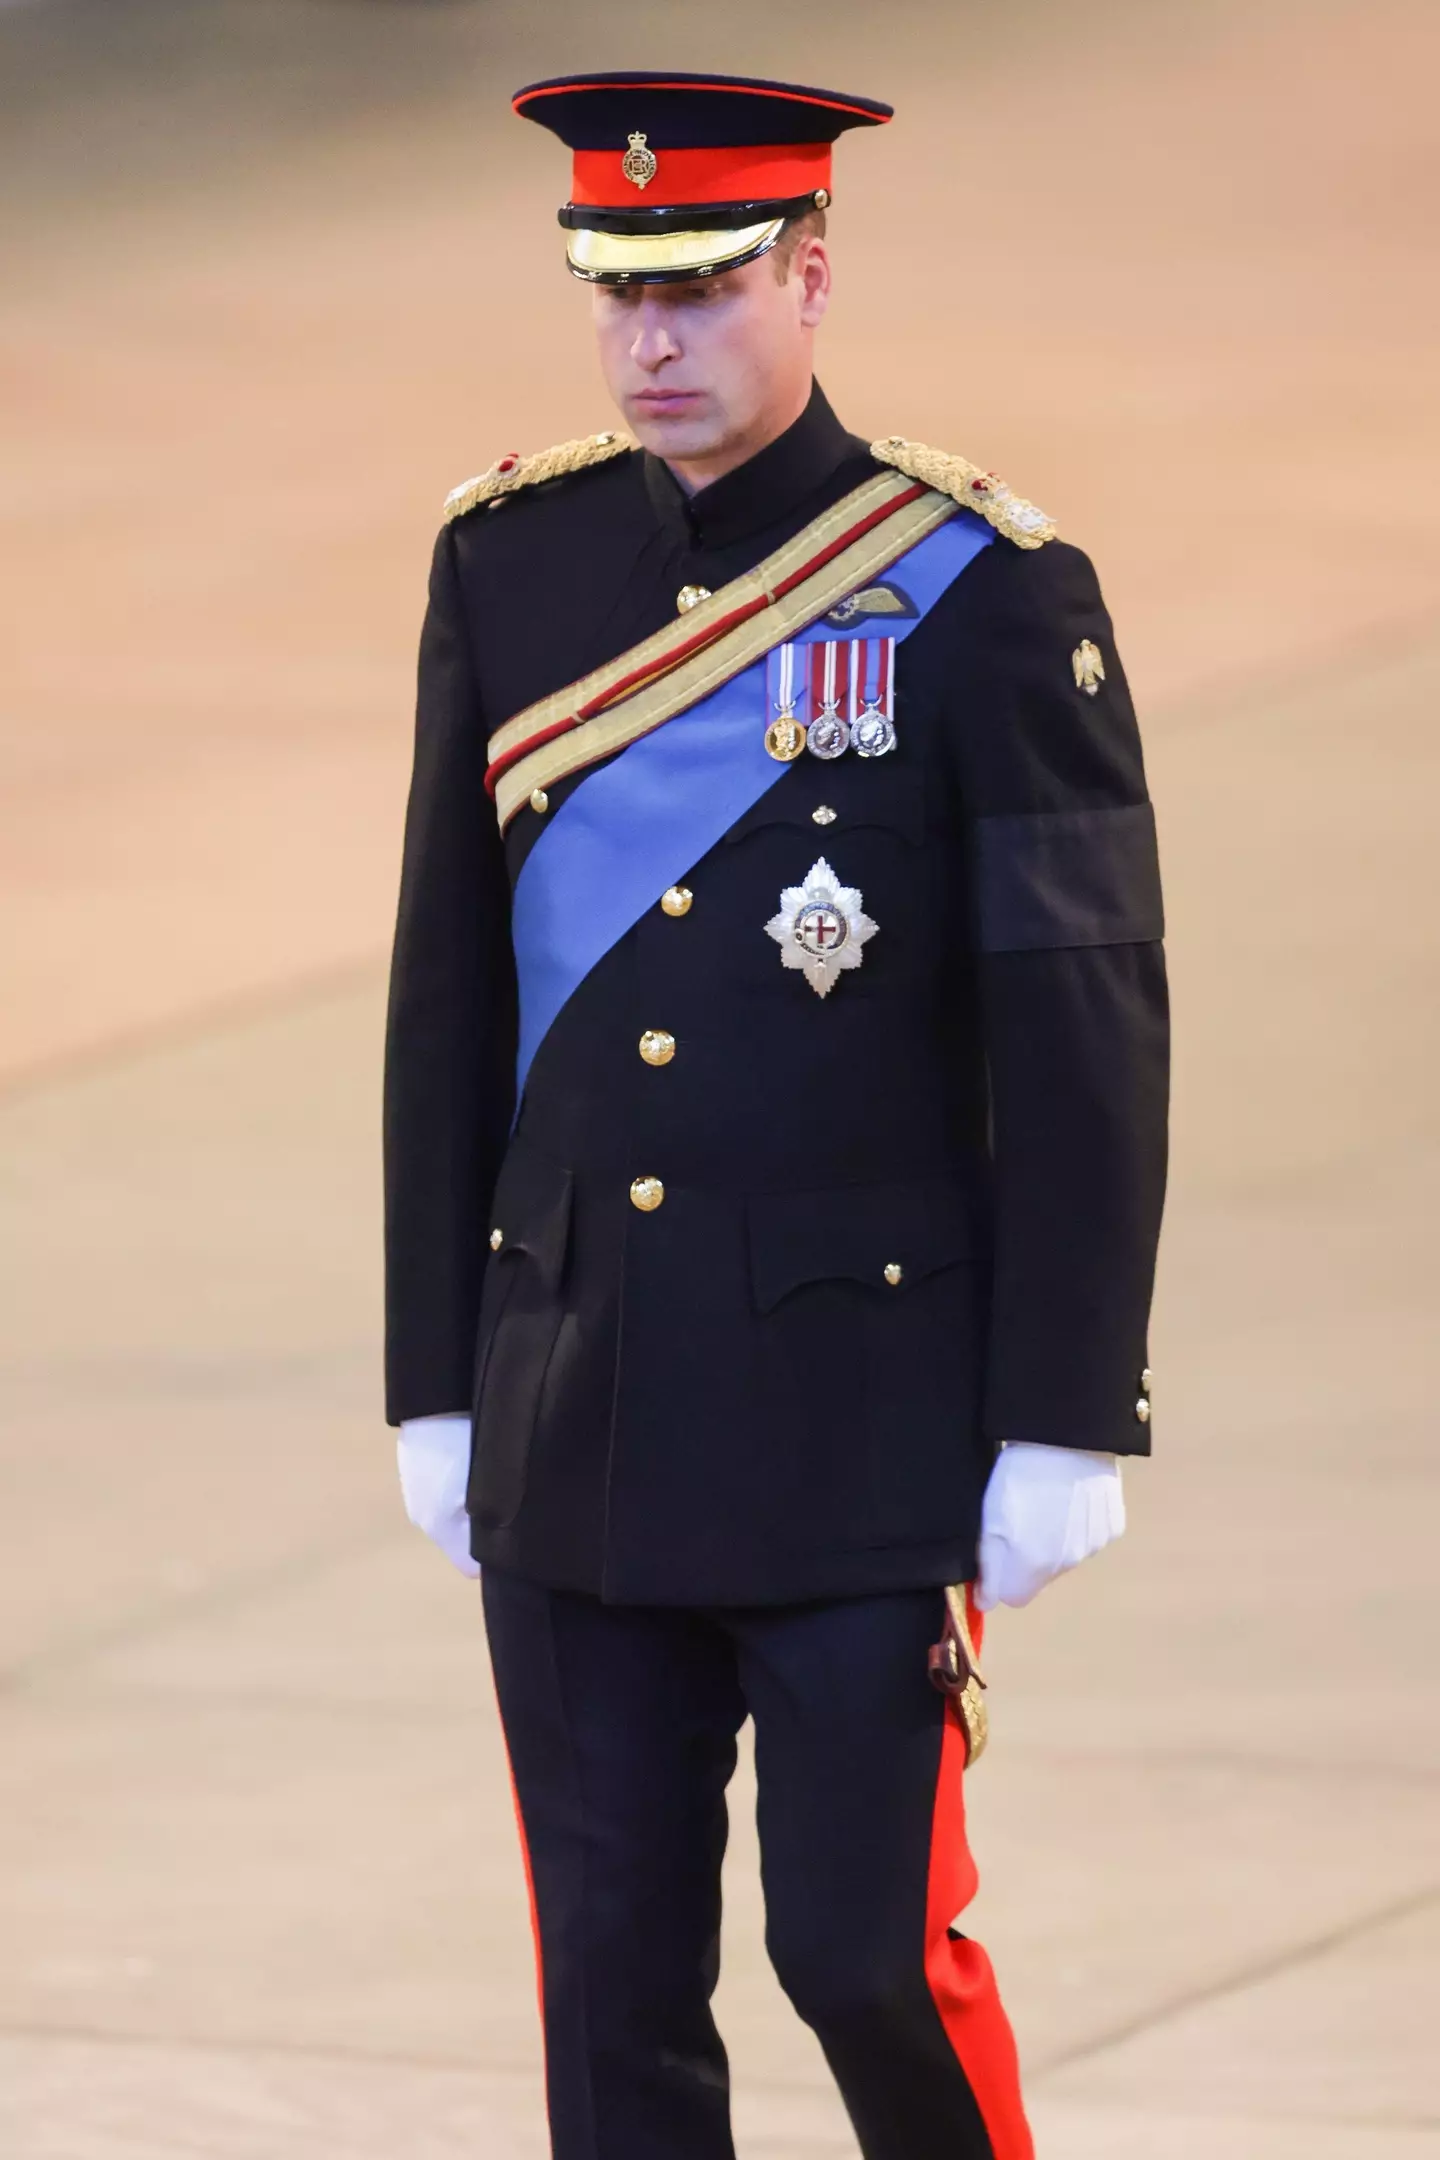 Prince William was allowed to wear the 'ER' symbol.